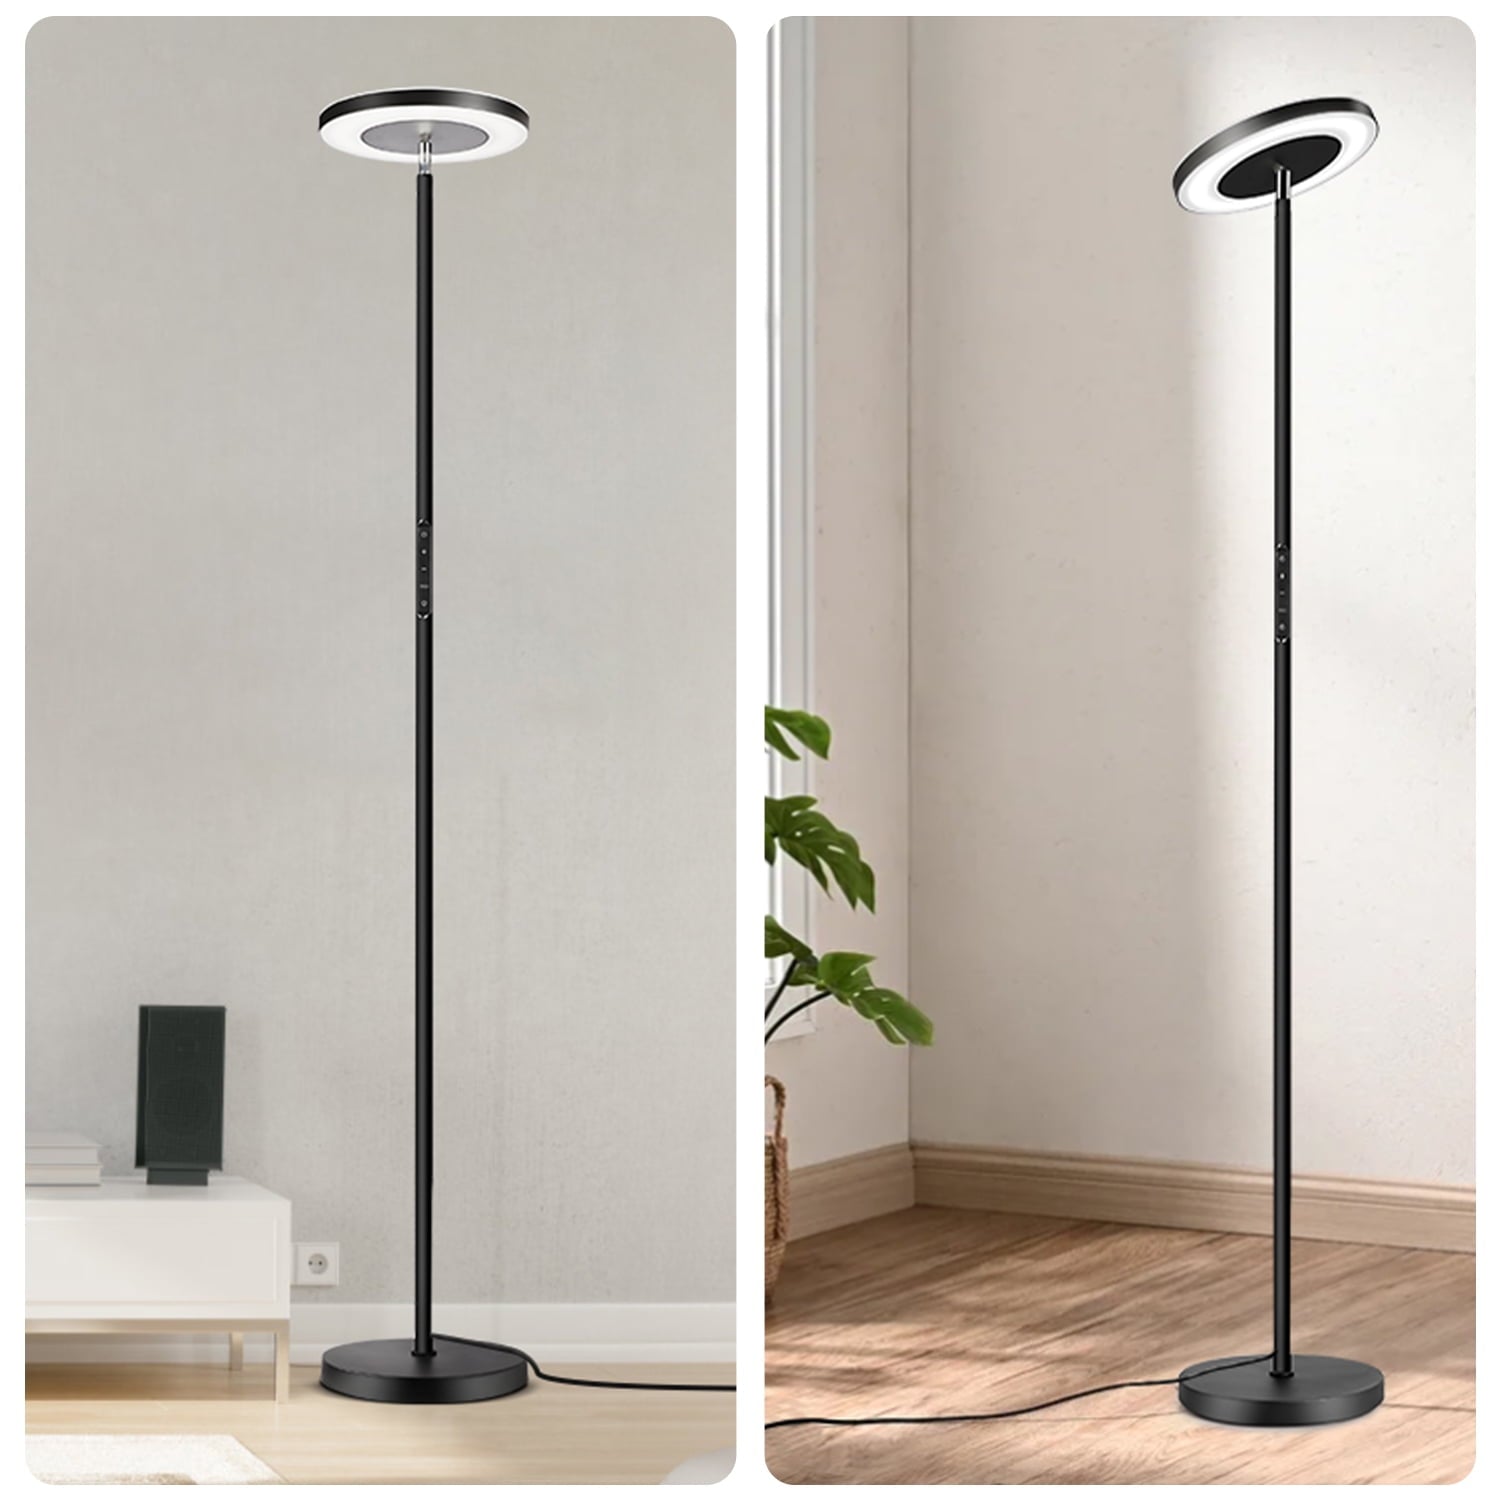 OUTON 71" Torchiere LED Floor Lamp with Remote and Touch Control, Super Bright 4 Color Temperature Standing Light with Double Side Lighting, Black